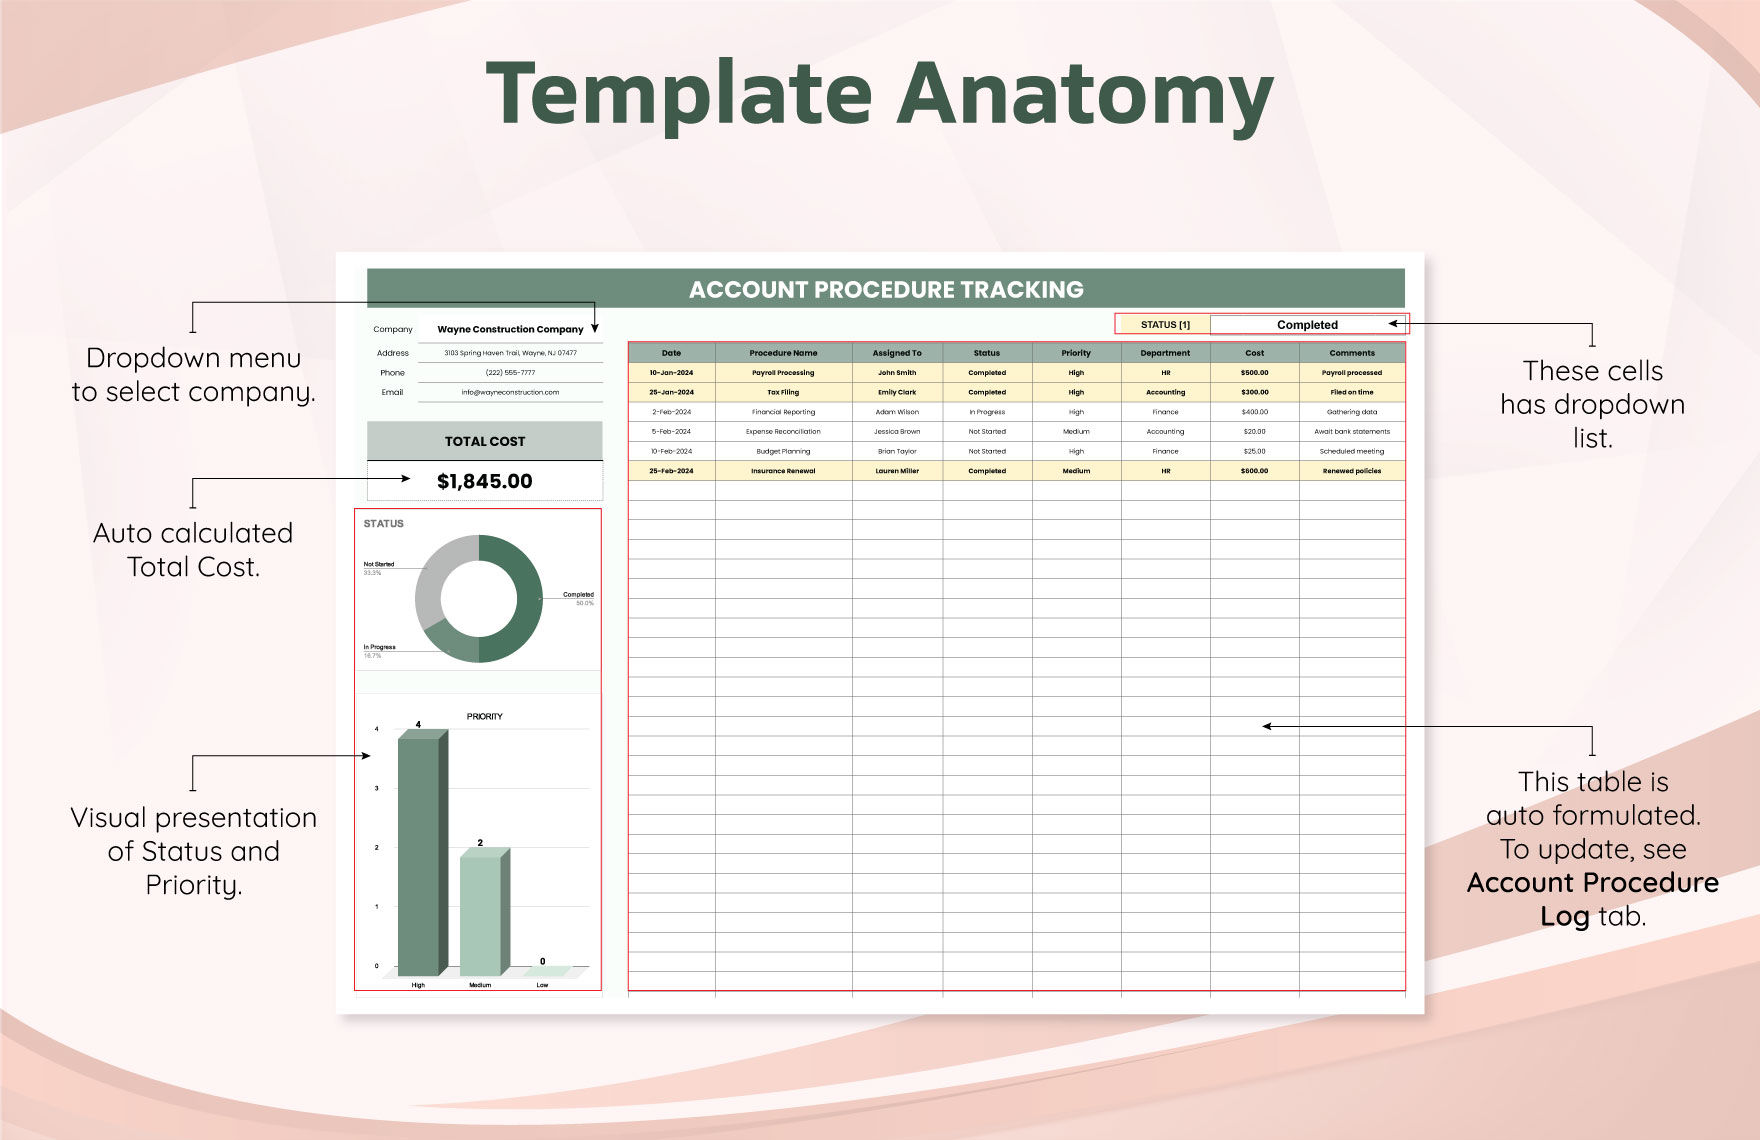 Account Procedure Tracking Template